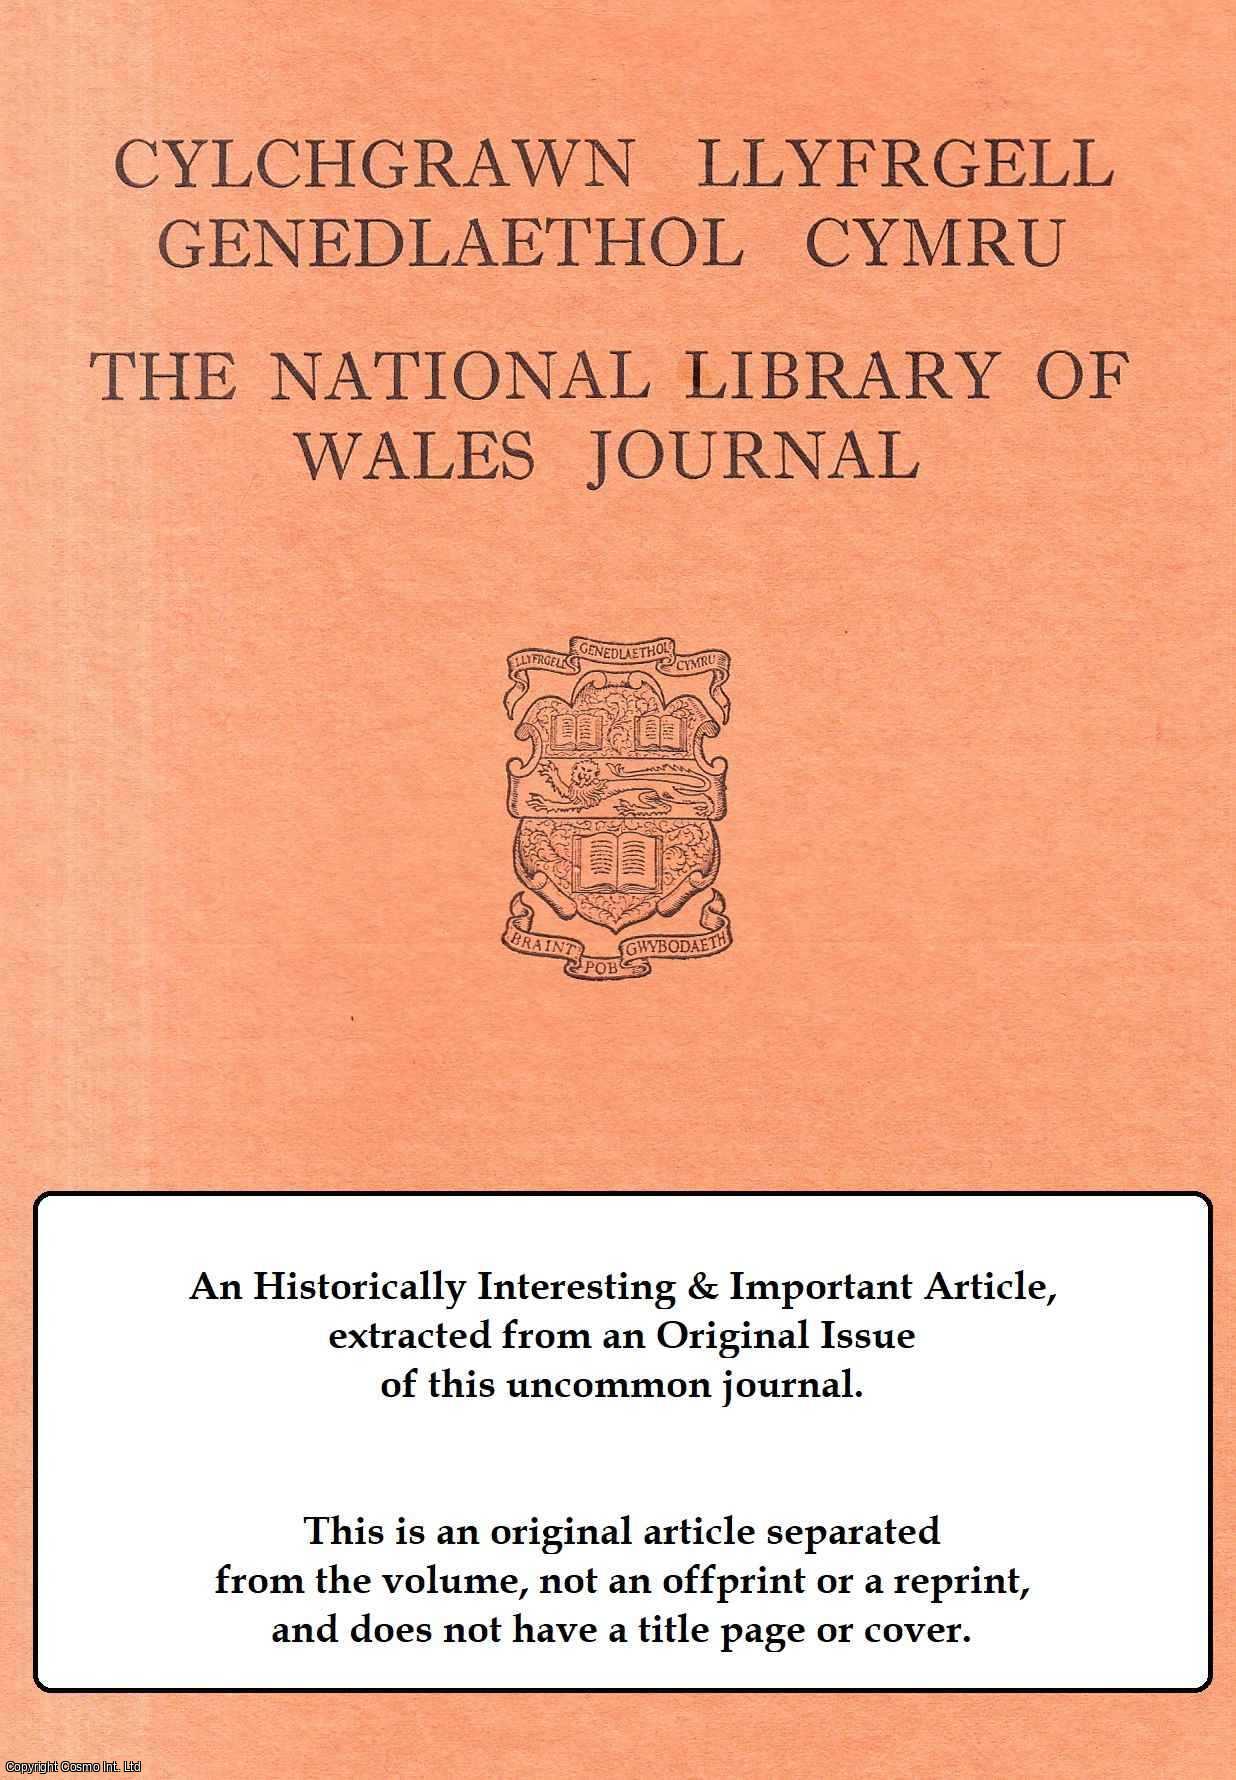 Francis Jones - A Victorian Bishop of Llandaff. An original article from The National Library of Wales Journal, 1975.